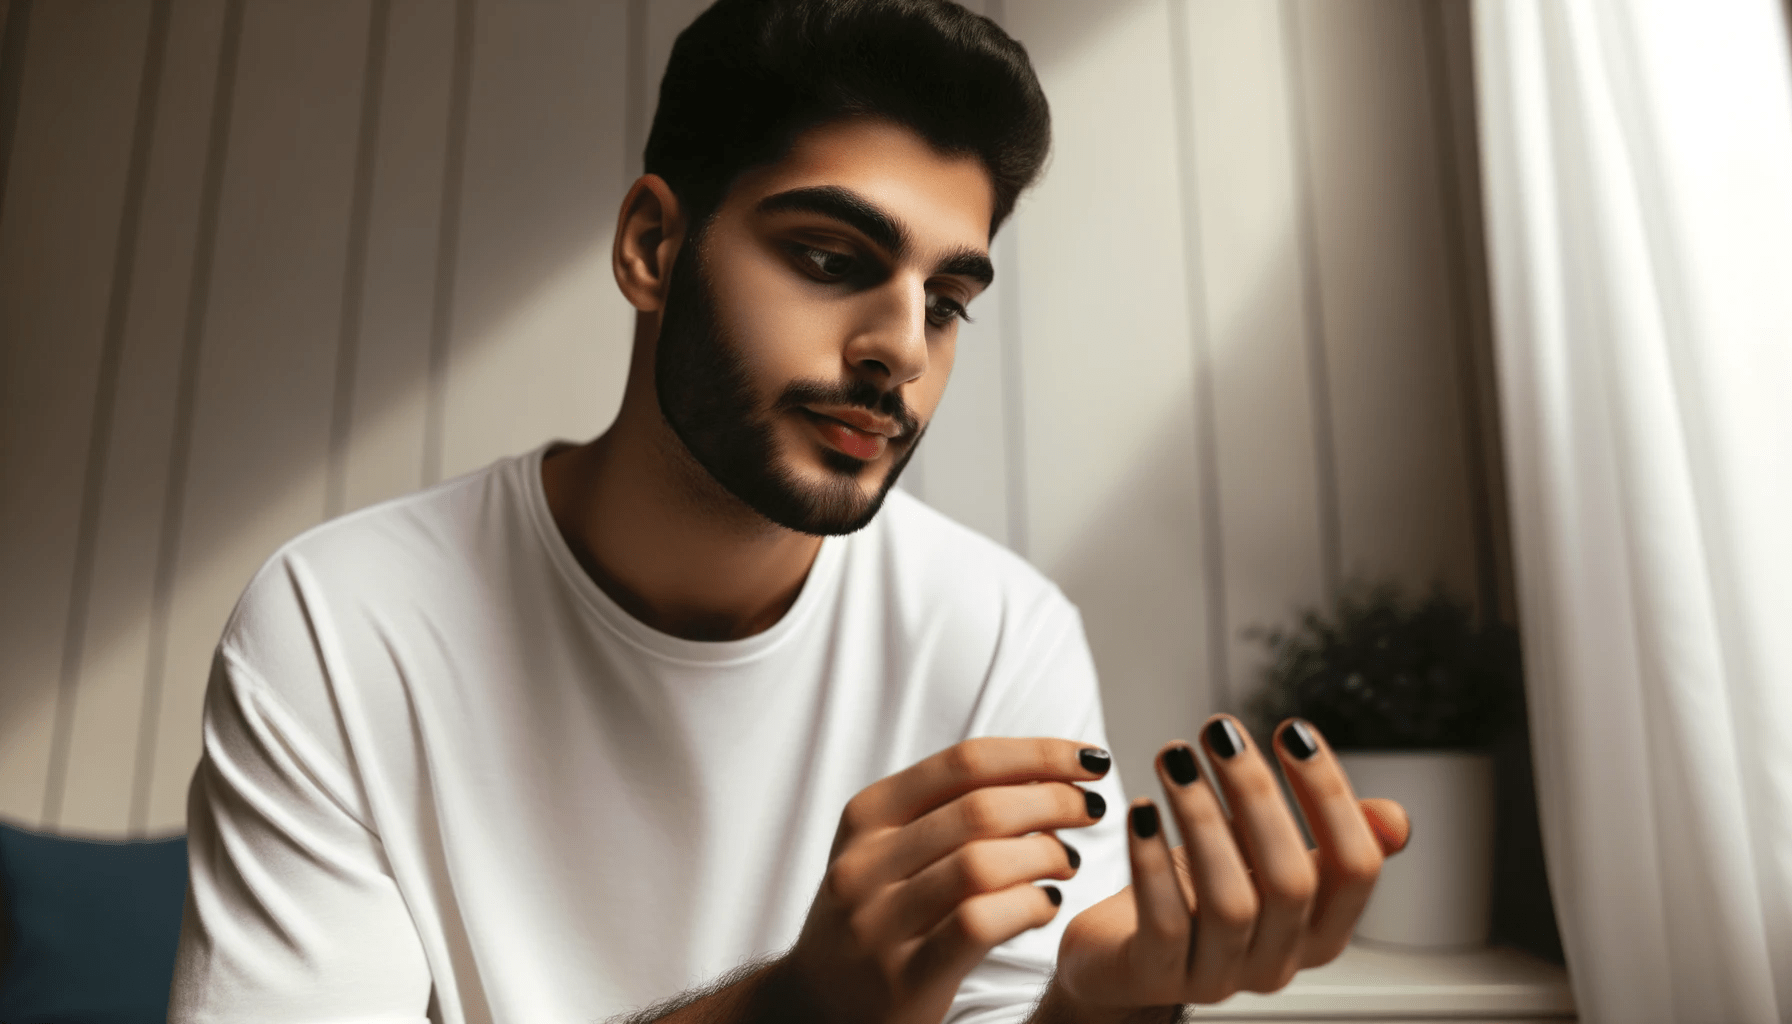 Photo of a young Middle Eastern man in a well lit room gazing at his black painted nails. Hes wearing a white t shirt and the background has a simpl